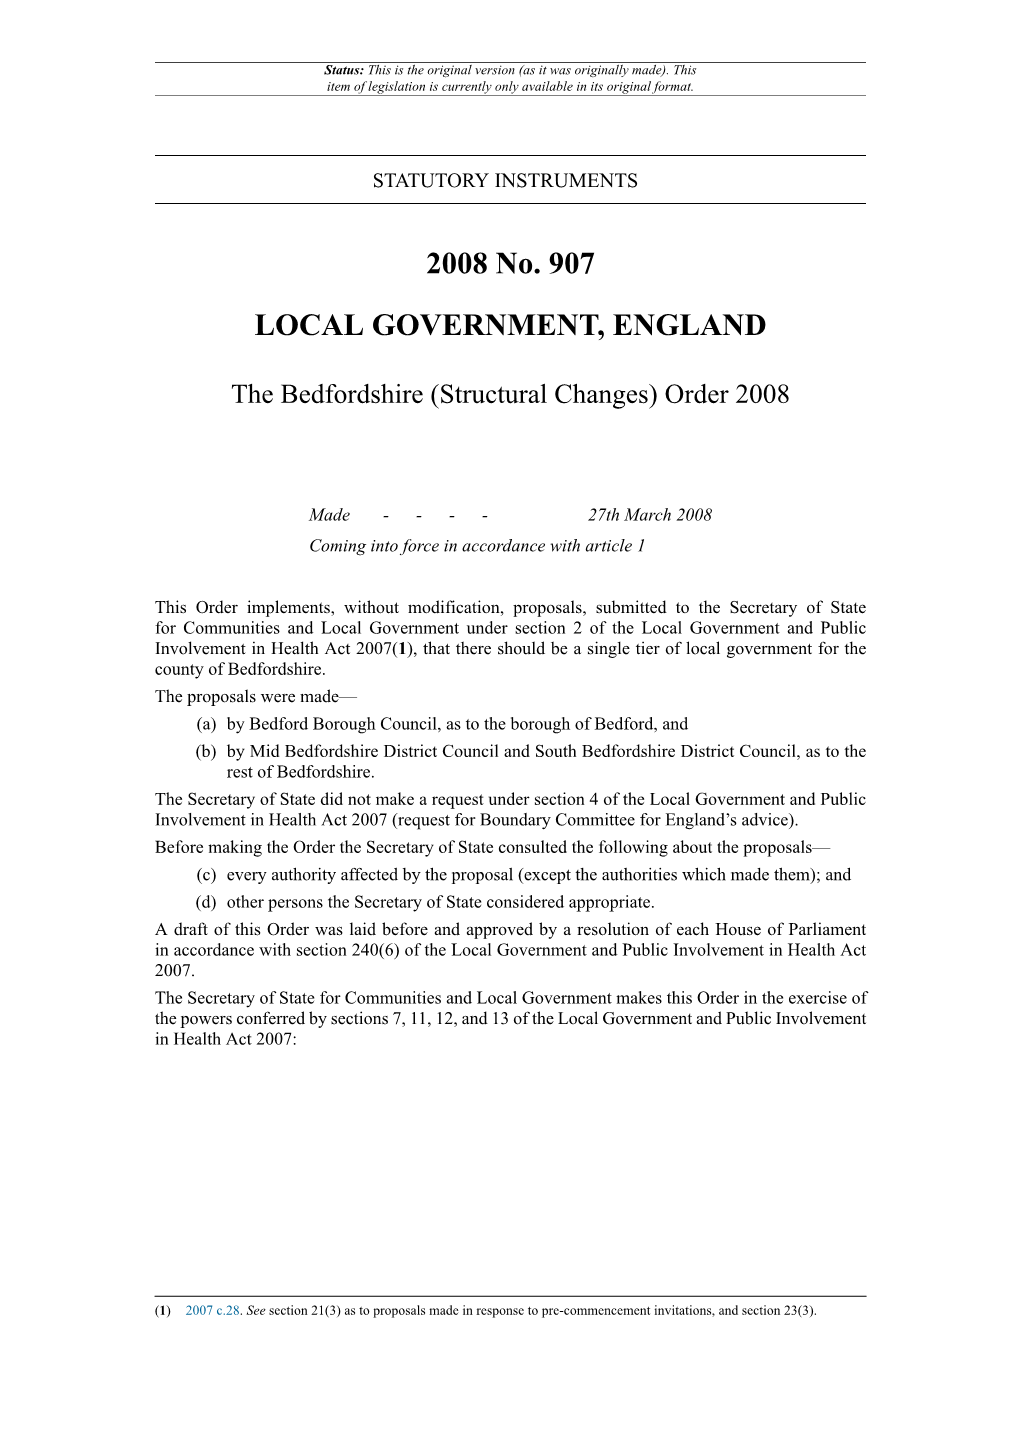 The Bedfordshire (Structural Changes) Order 2008